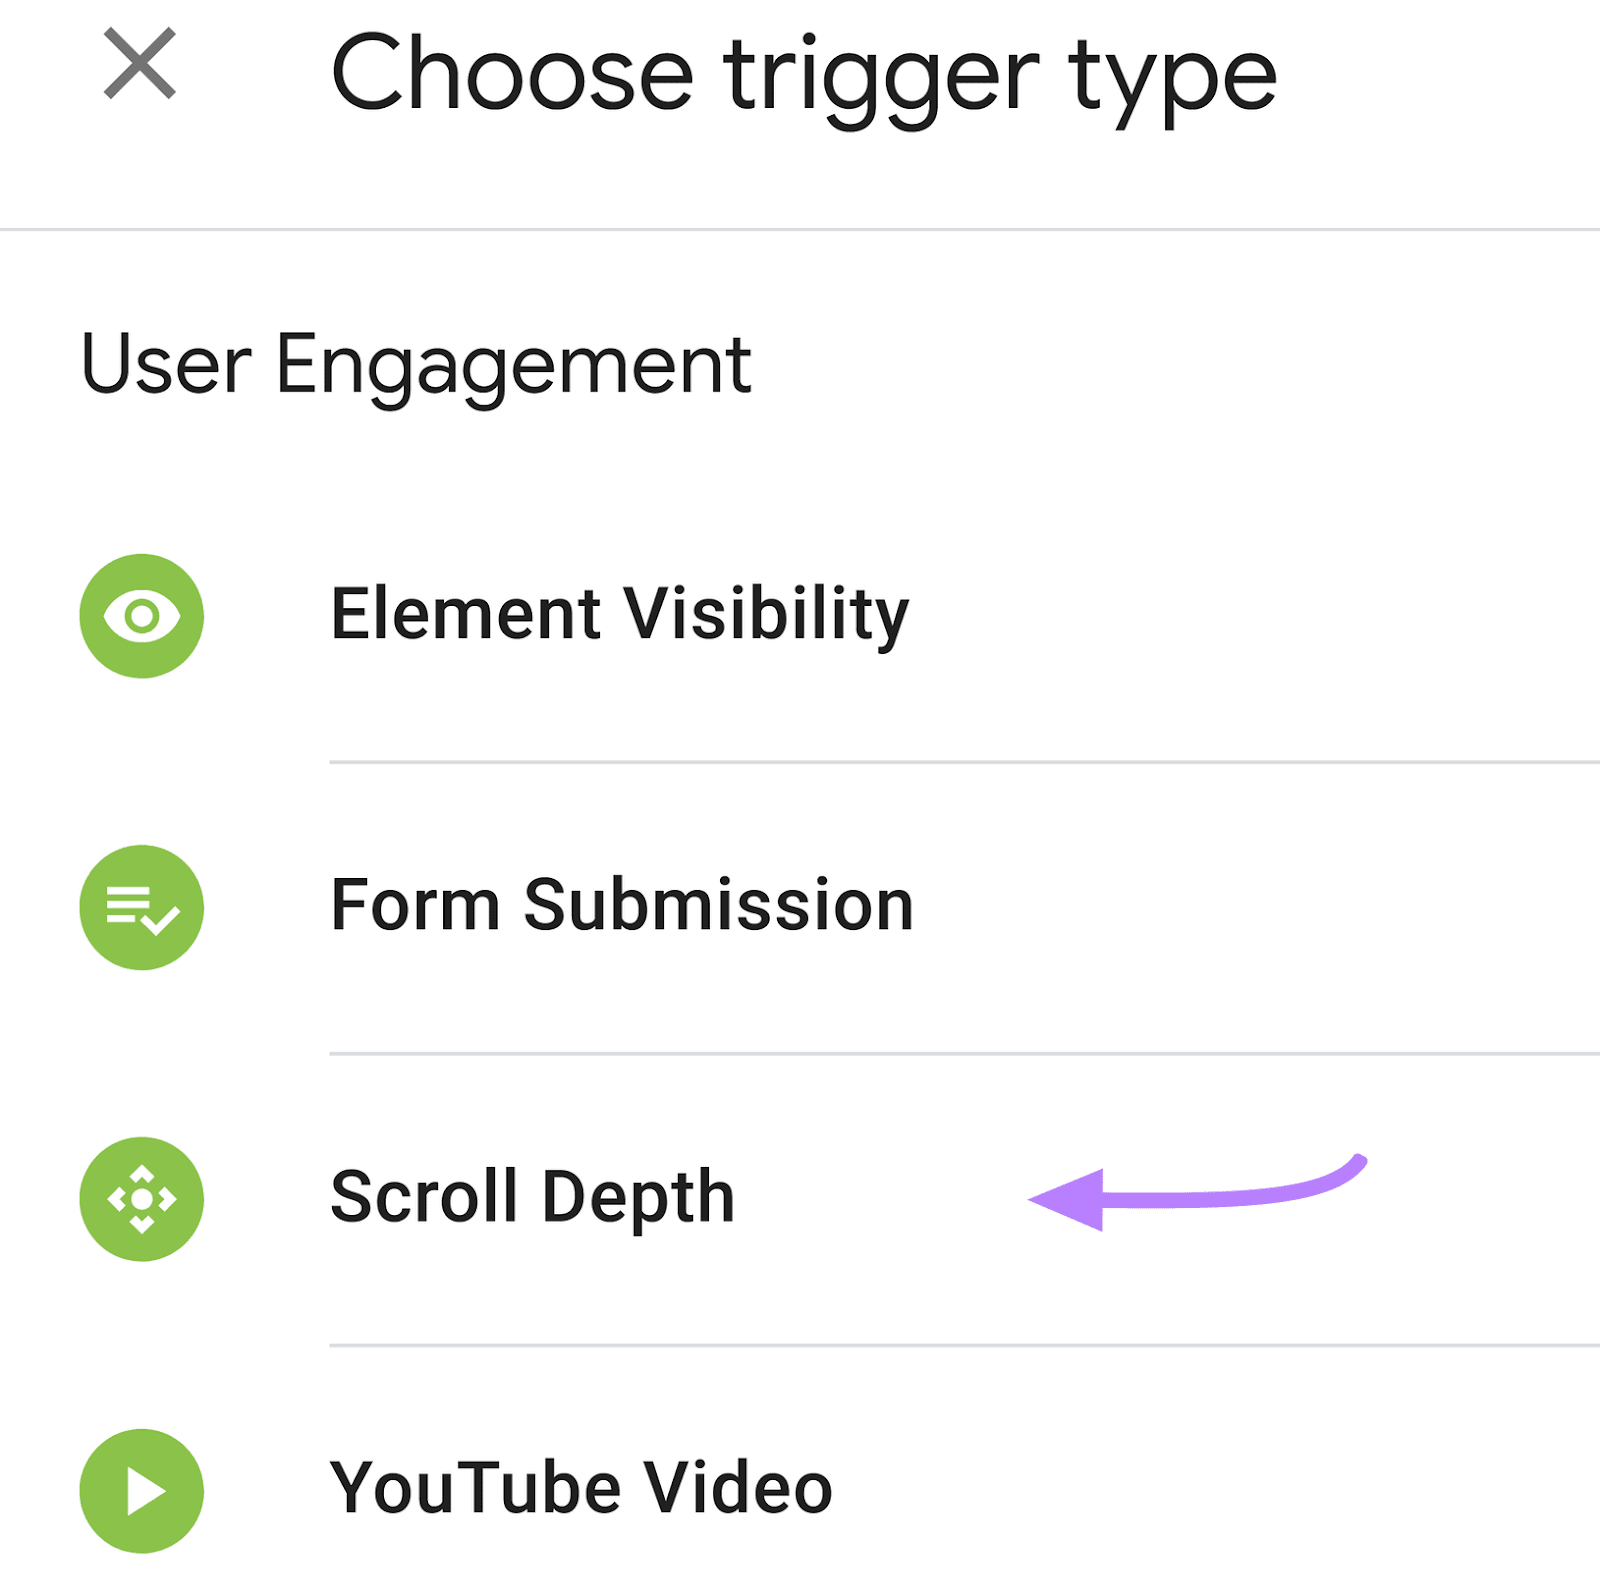 “Scroll Depth” option selected under “User Engagement” area